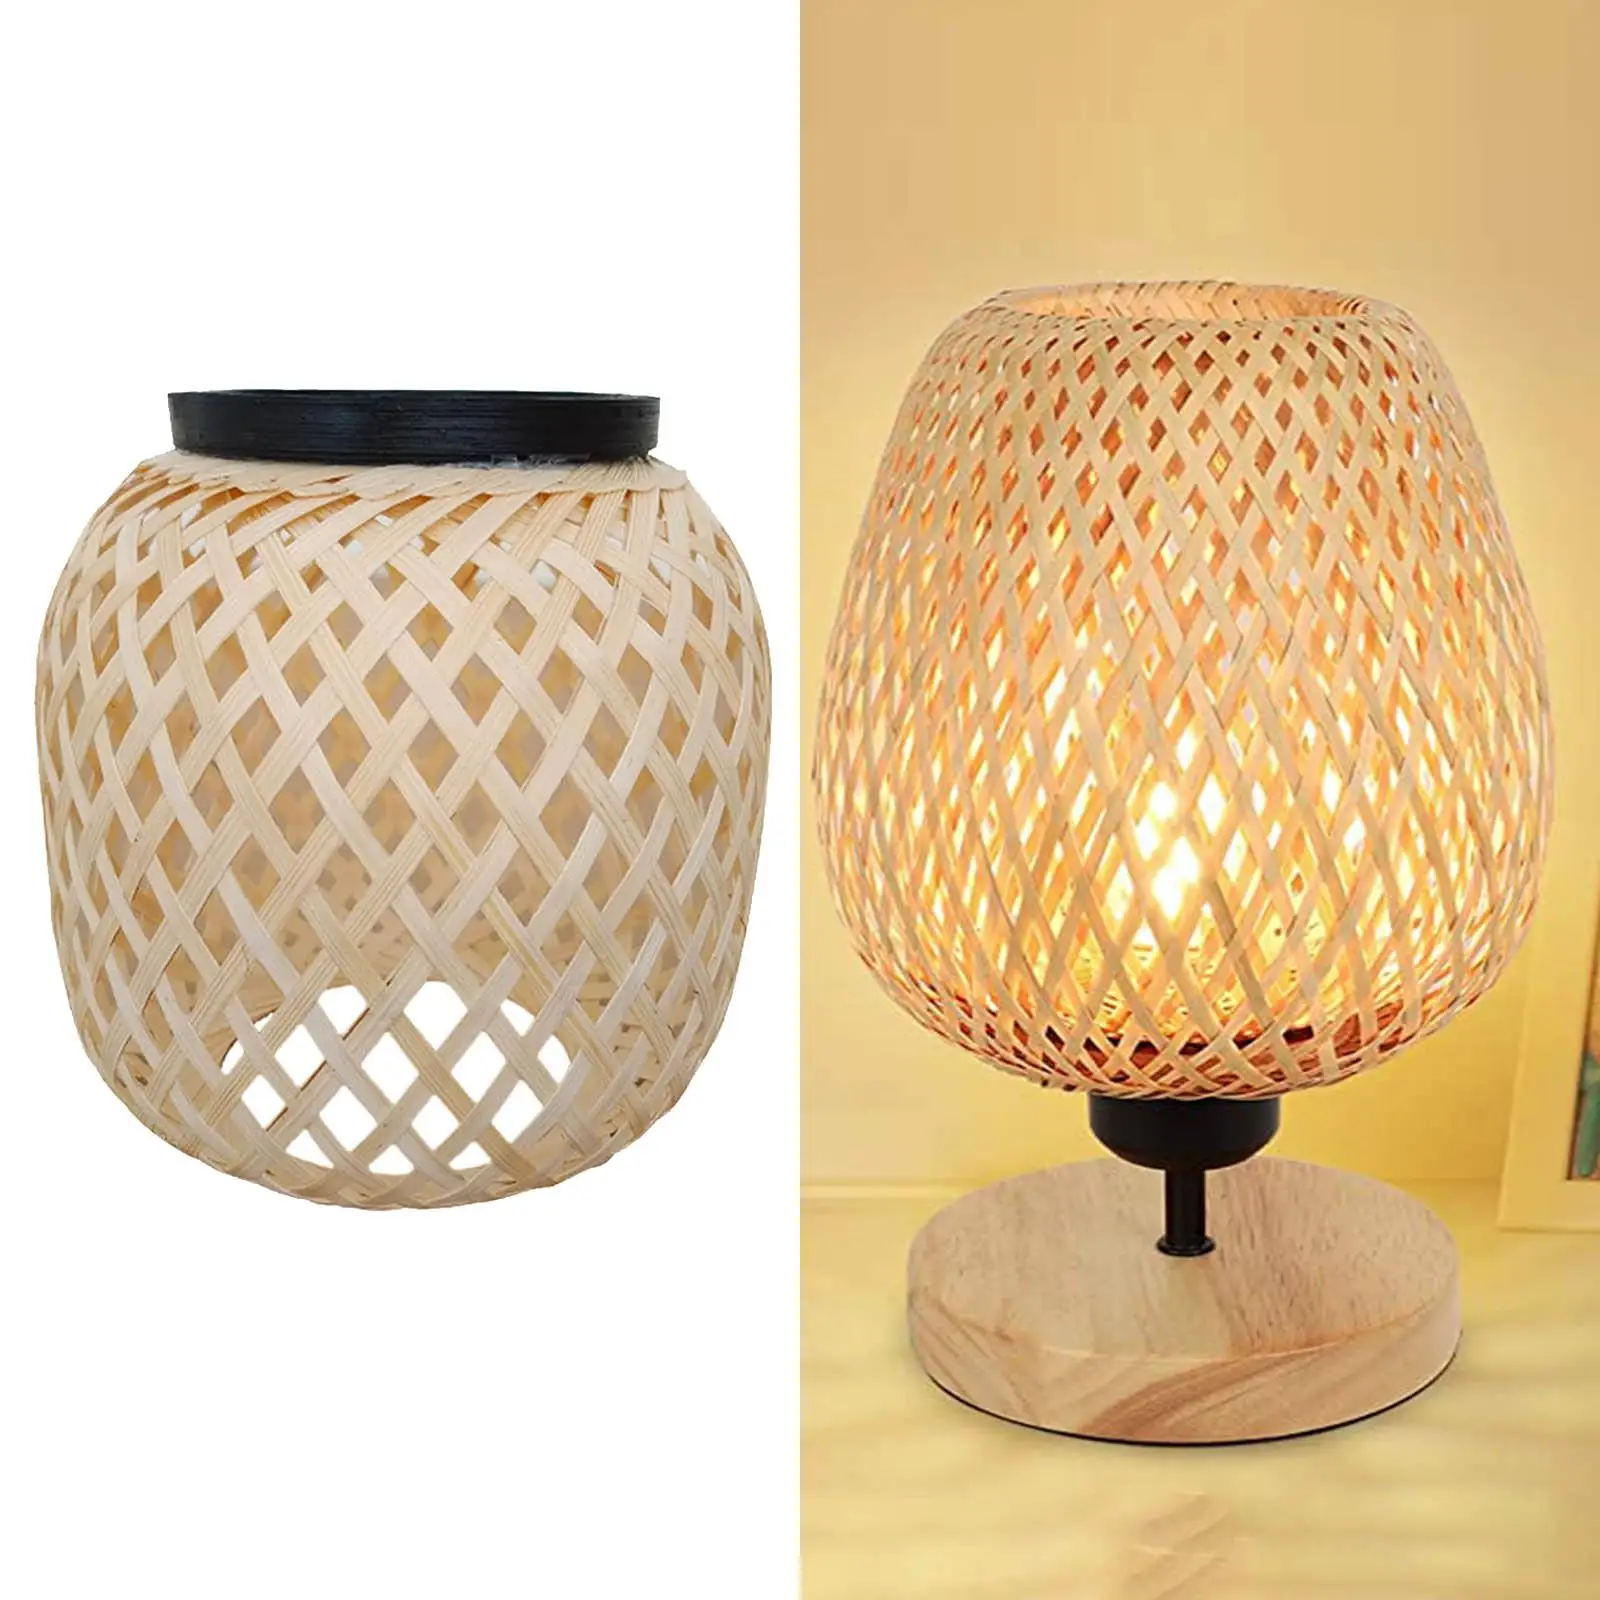 Modern Table Lamp Shade Fixture Lighting Cover Woven for Room